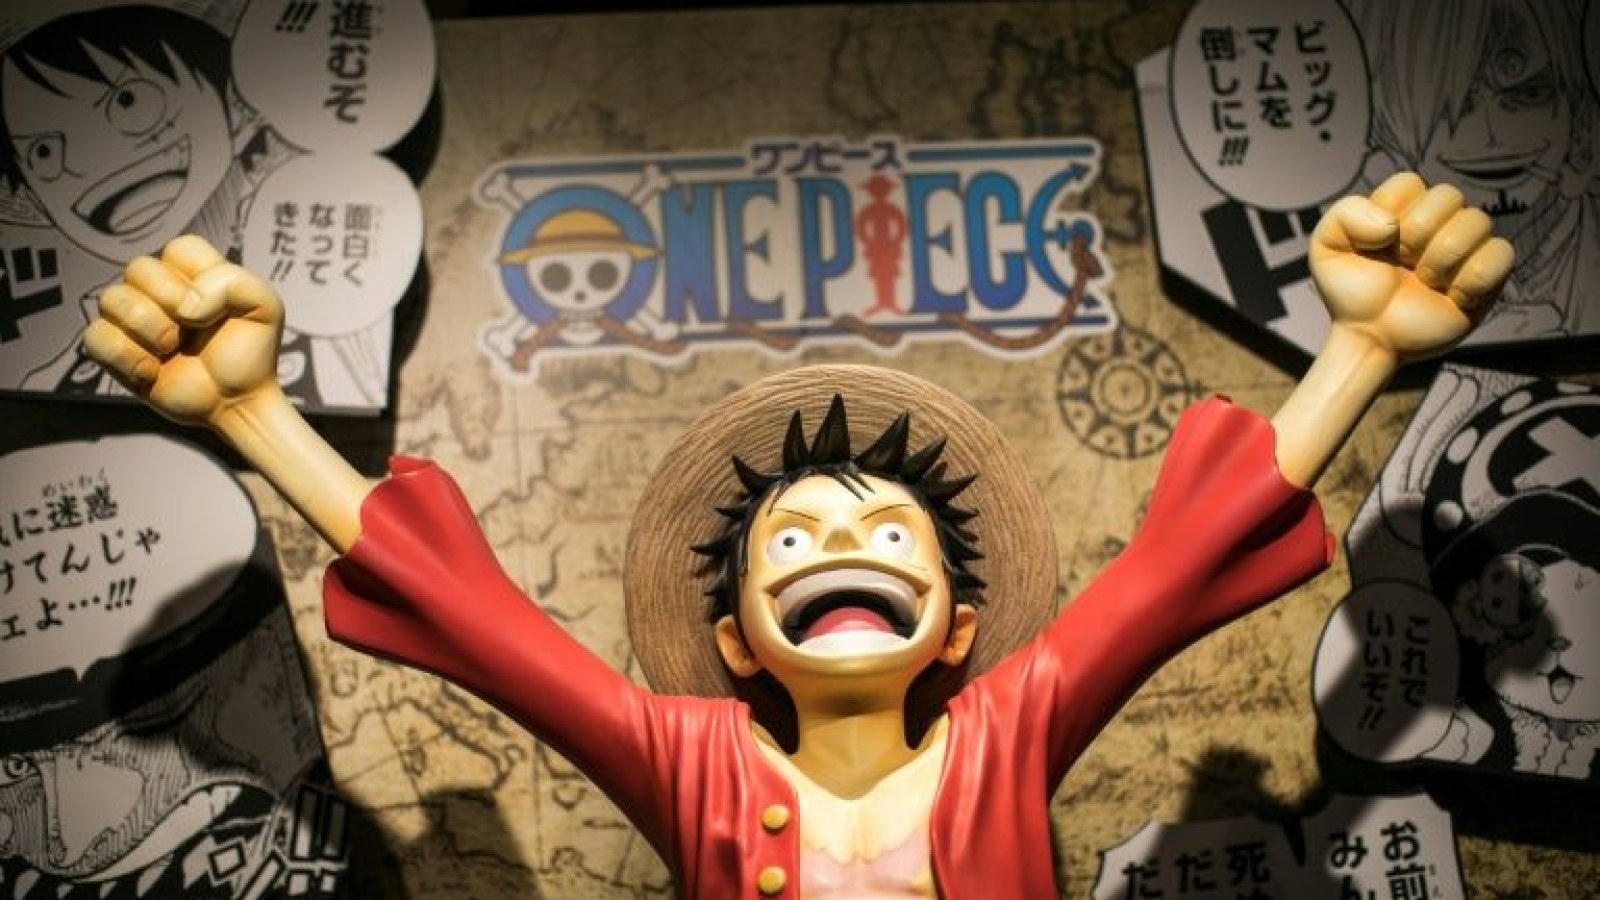 One Piece' Episode 1027 Spoilers, Preview And Release Date